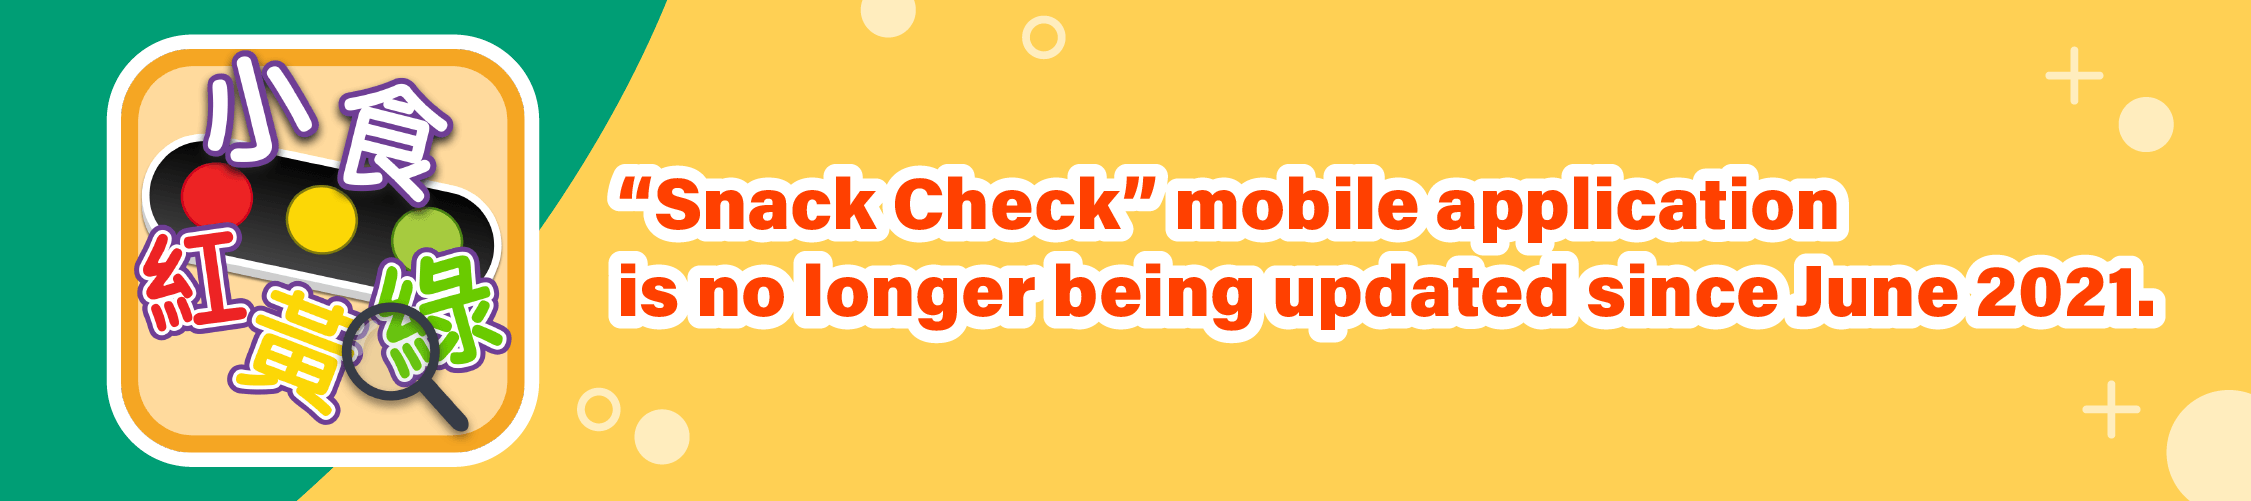 "Snack Check" moblie application is no longer being updated since June 2021.